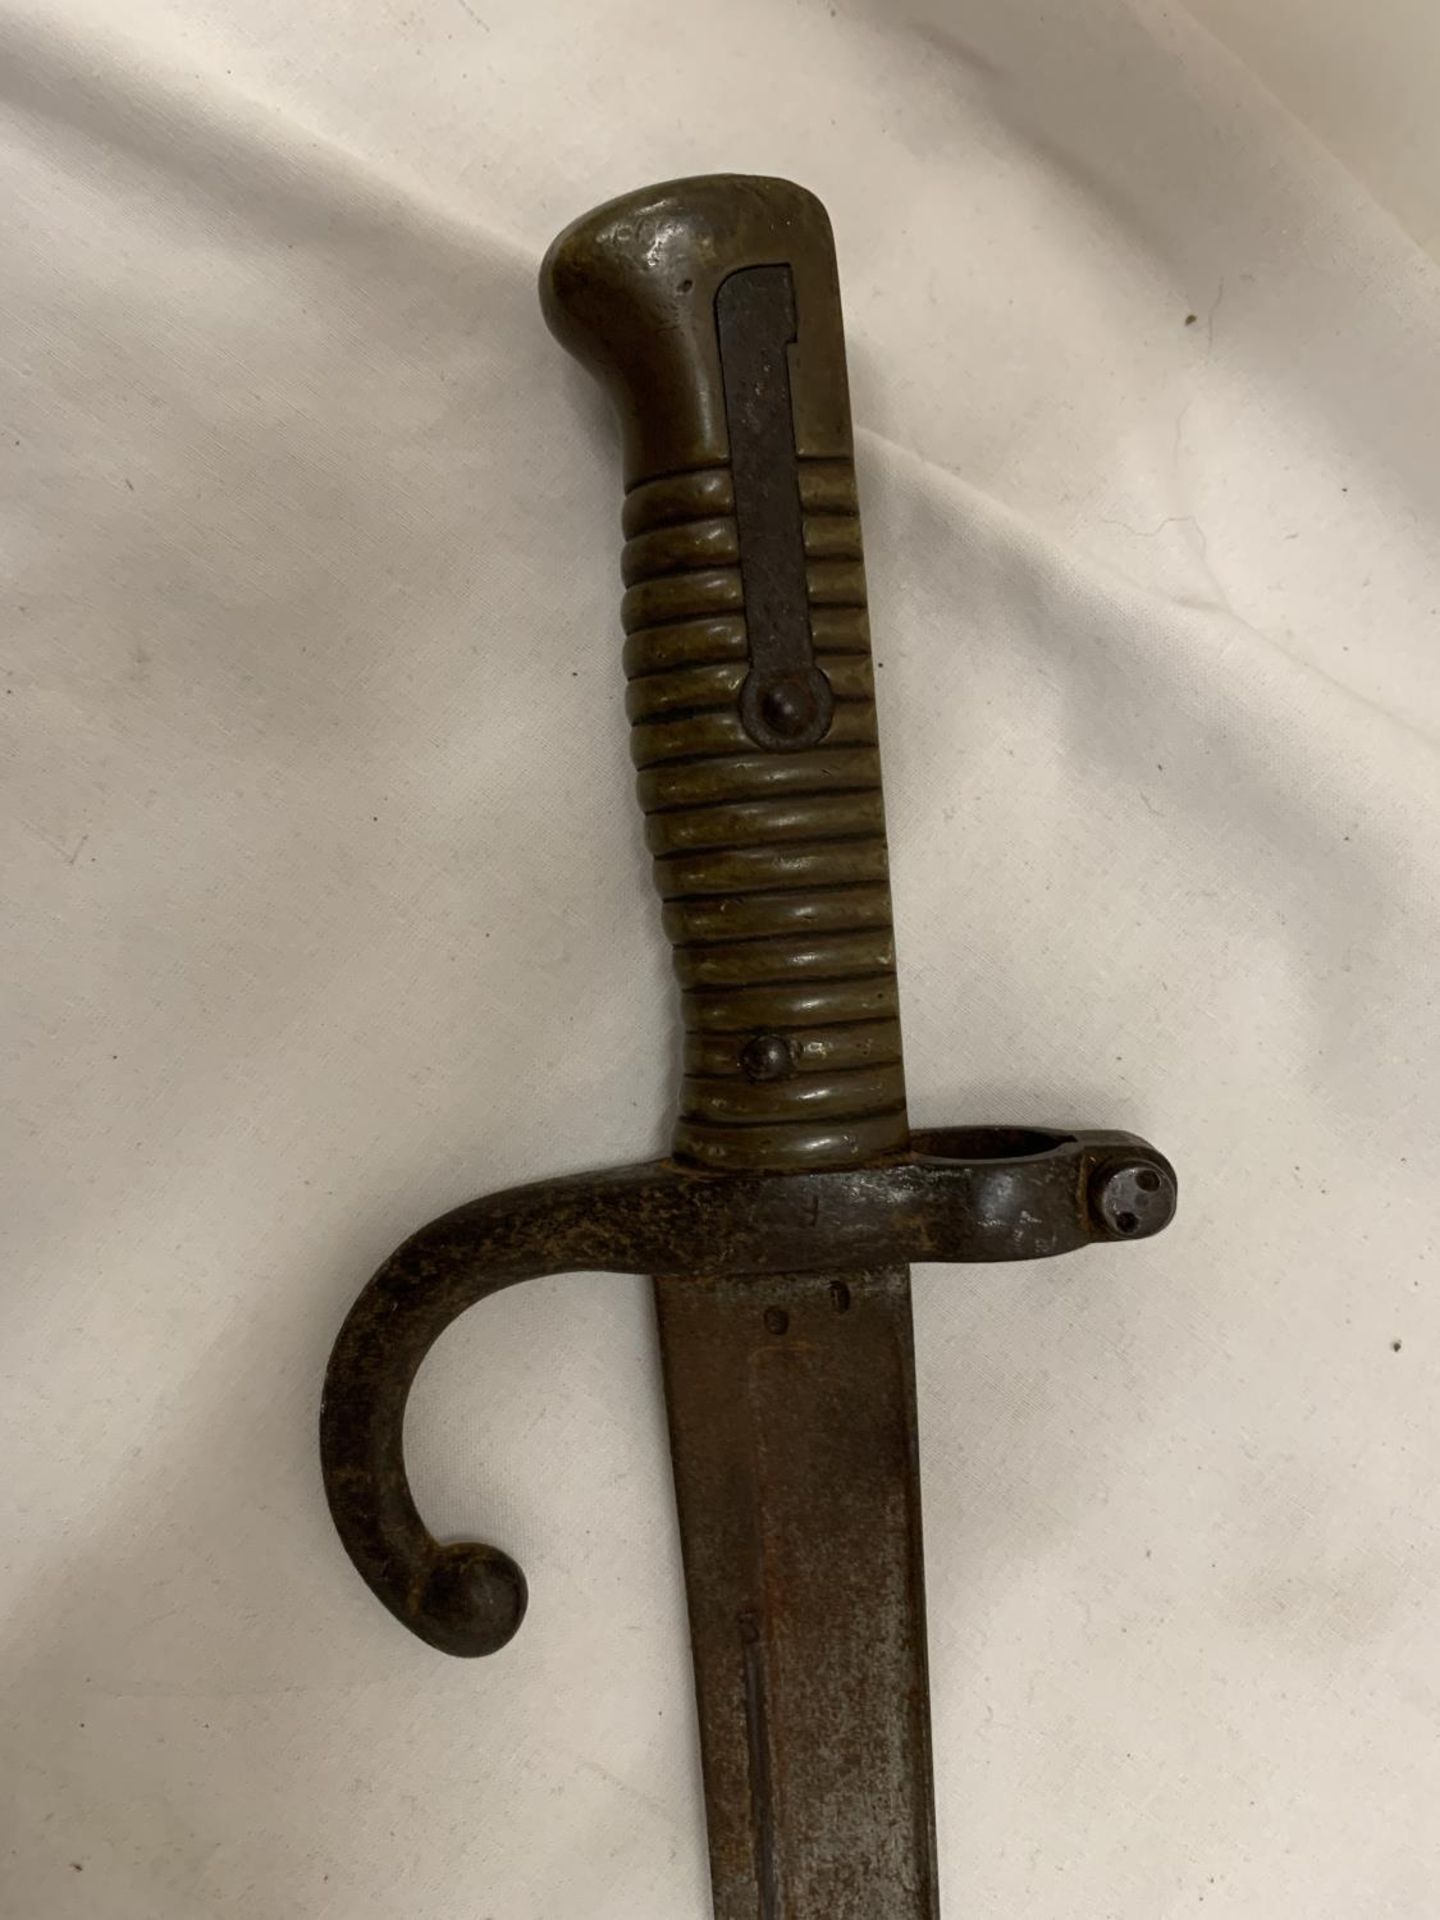 A FRENCH, 1866, CHASSEPOT SWORD/BAYONET - Image 5 of 6